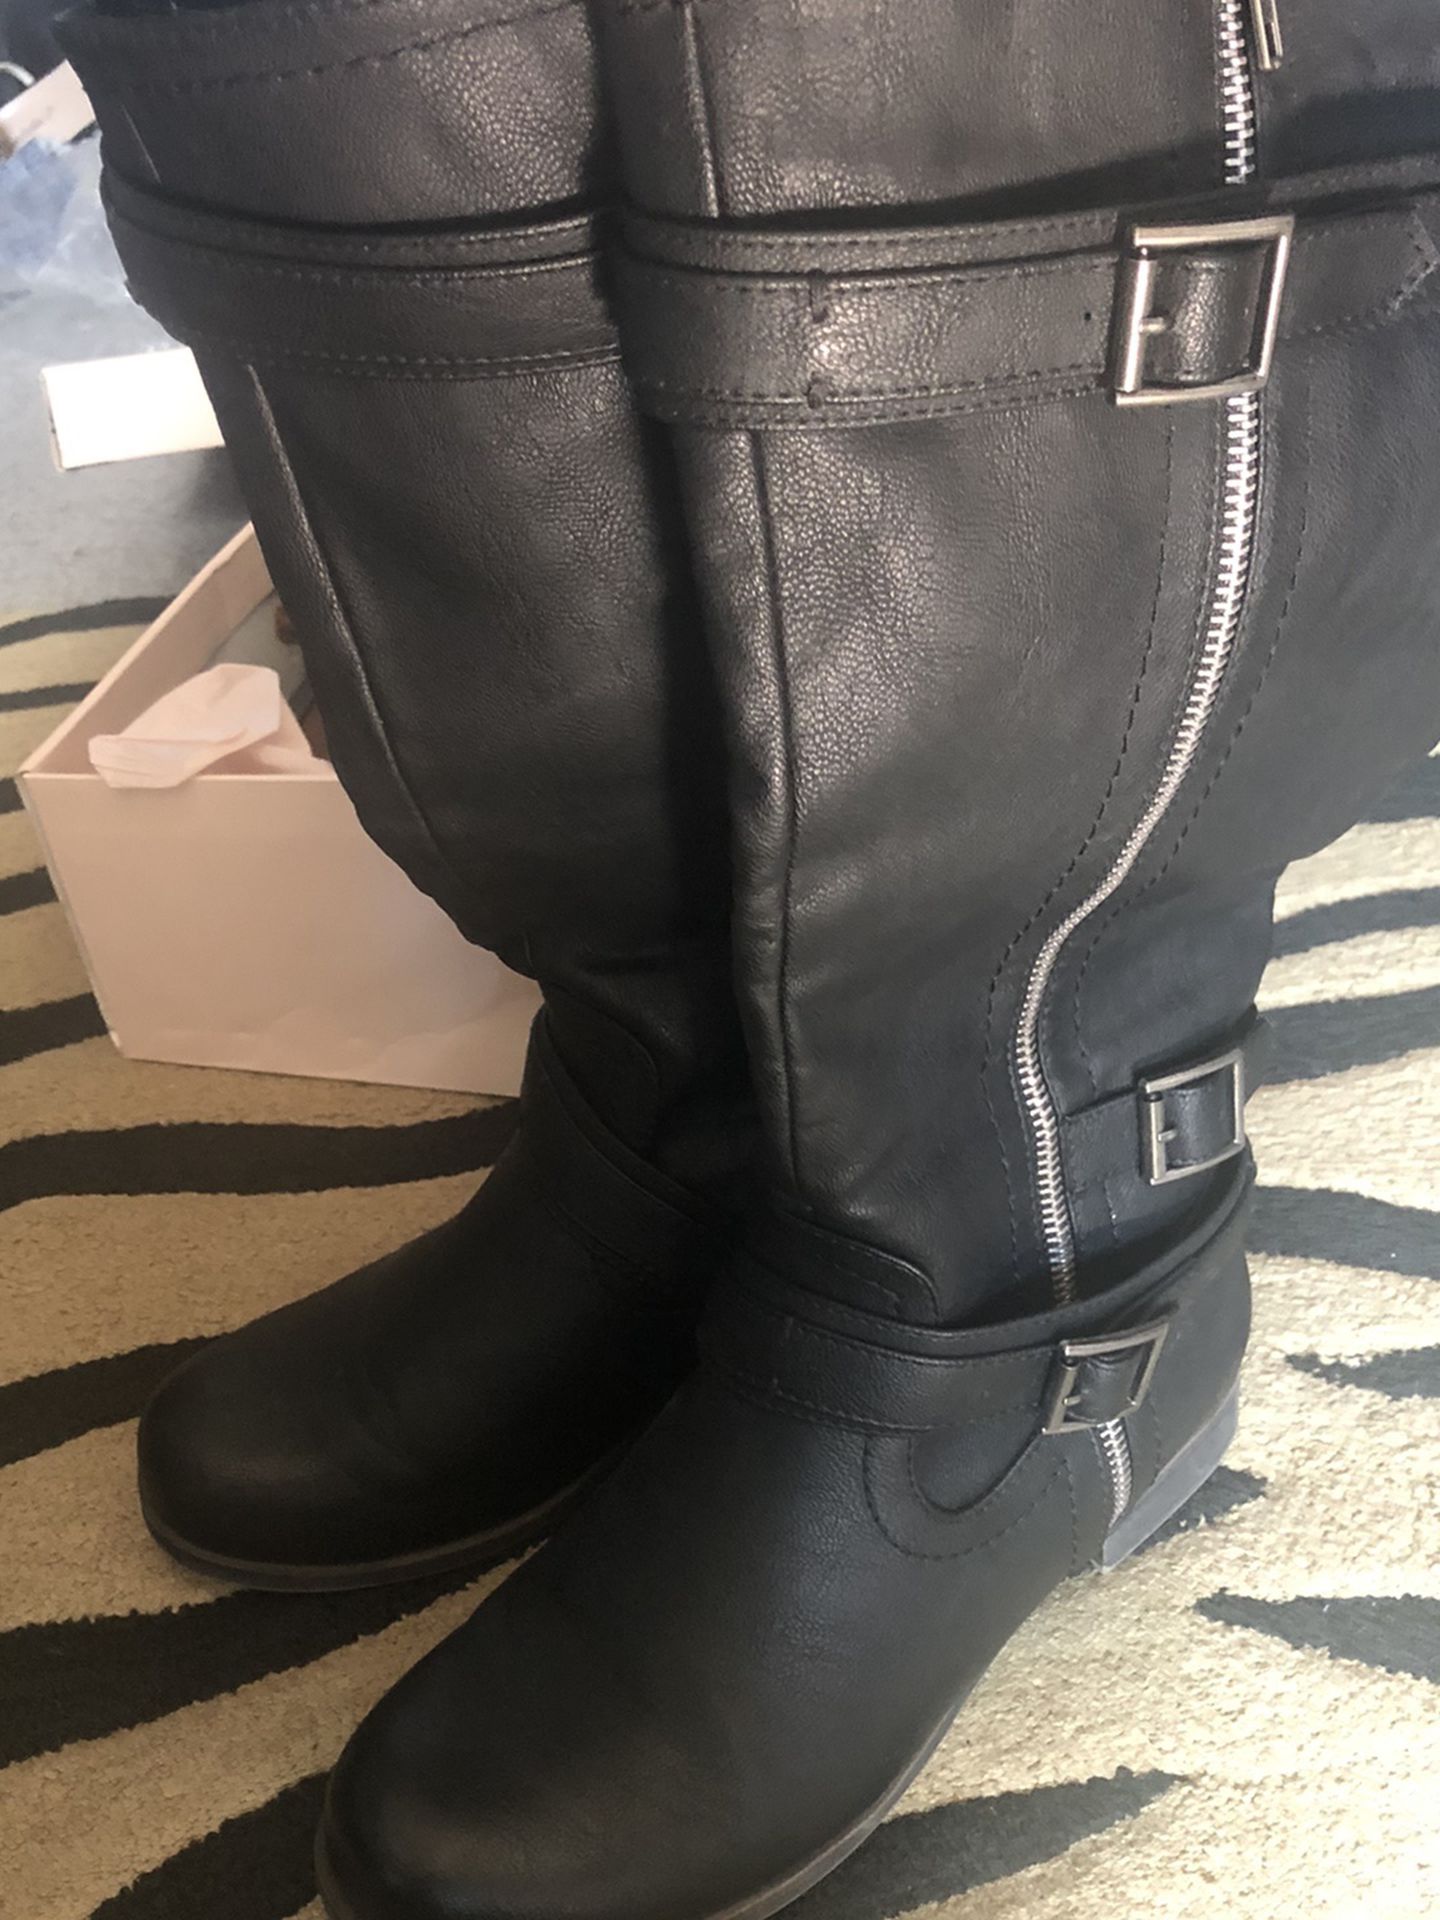 Womens Black Boots Size 7 1/2